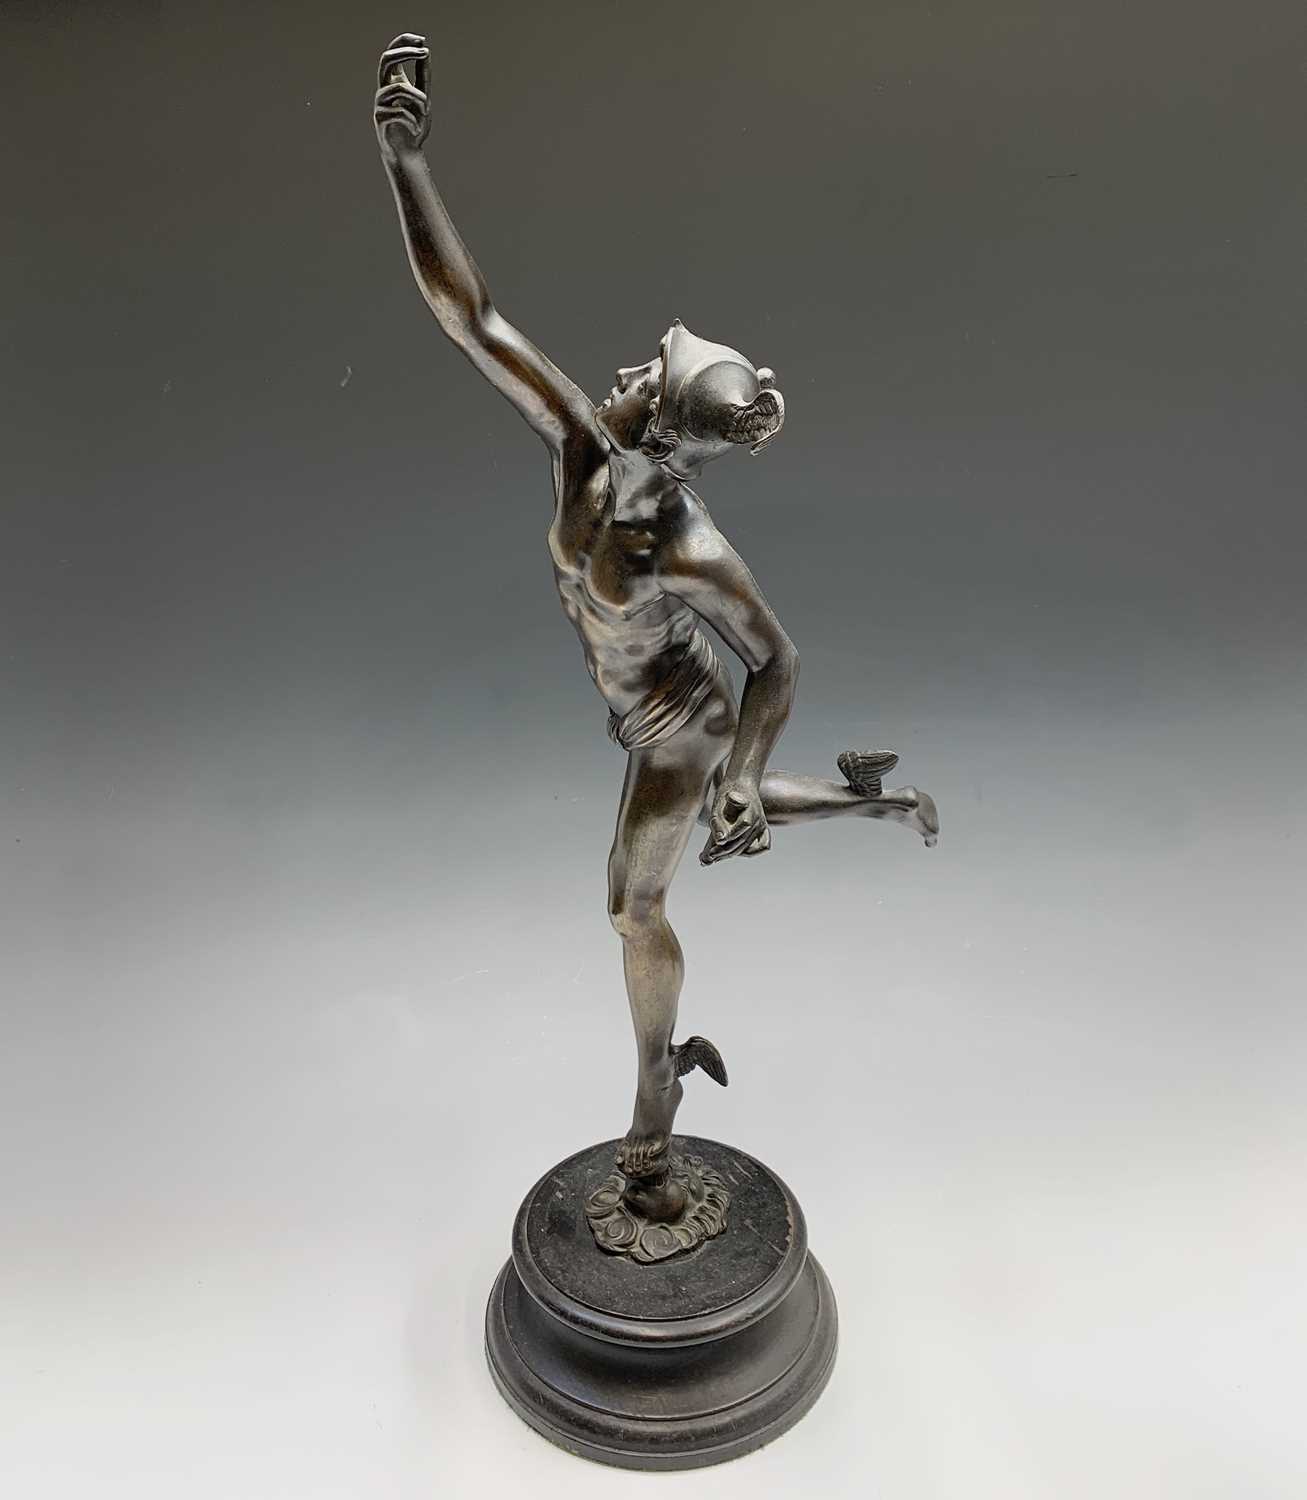 An early 20th century bronze figure of Mercury supported by a zephyr, after Gimbologna, on - Image 2 of 12